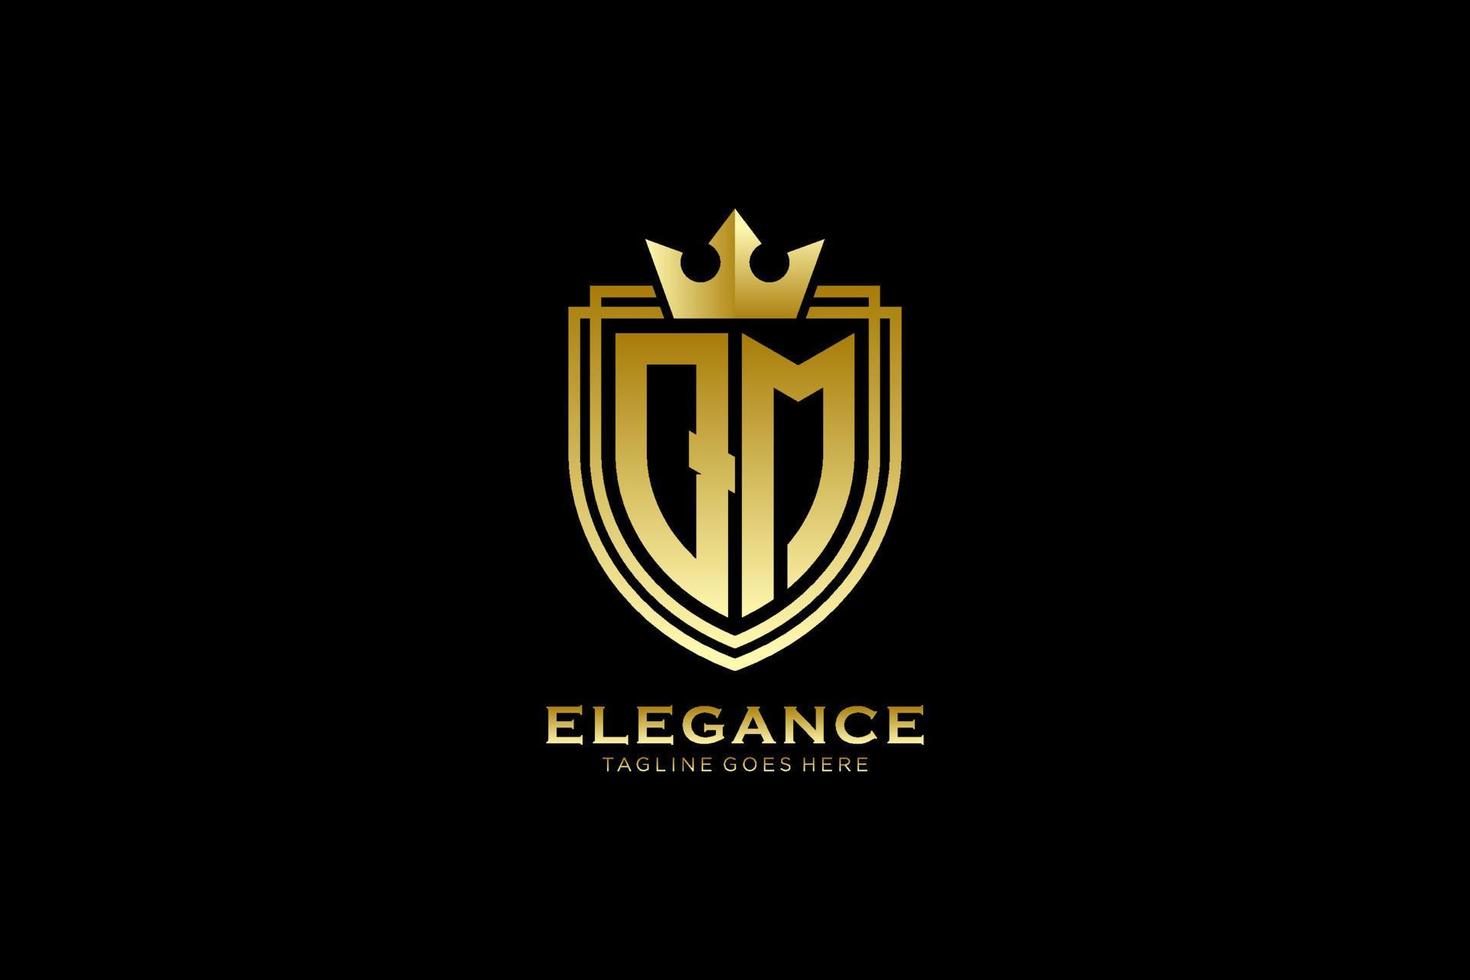 initial QM elegant luxury monogram logo or badge template with scrolls and royal crown - perfect for luxurious branding projects vector